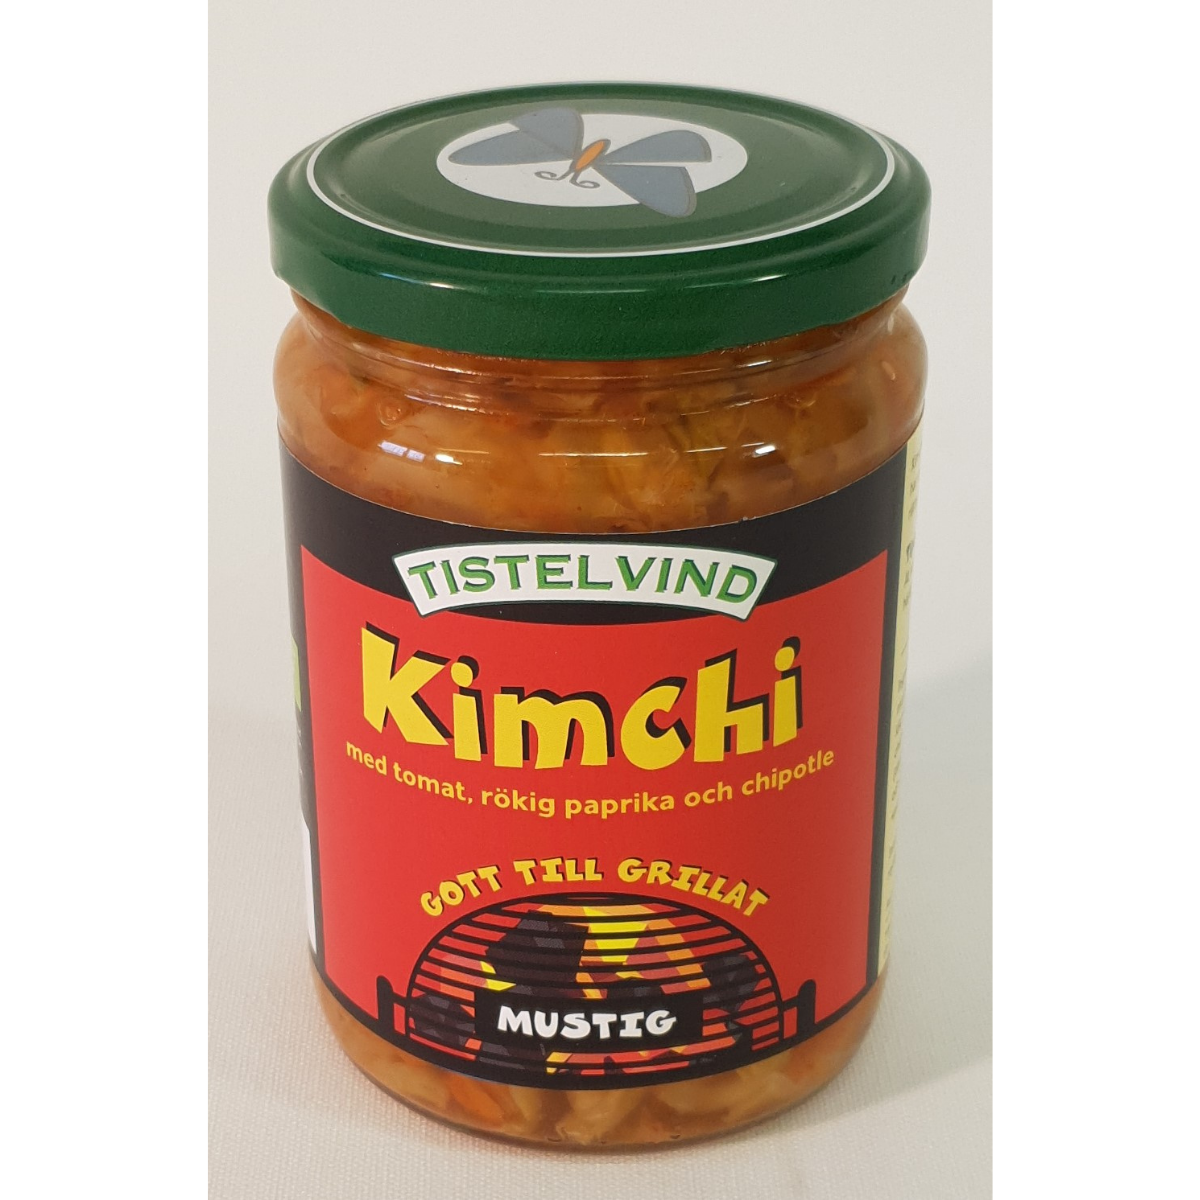 Tistelvind's Kimchi Grill, with tomato and smoky peppers'